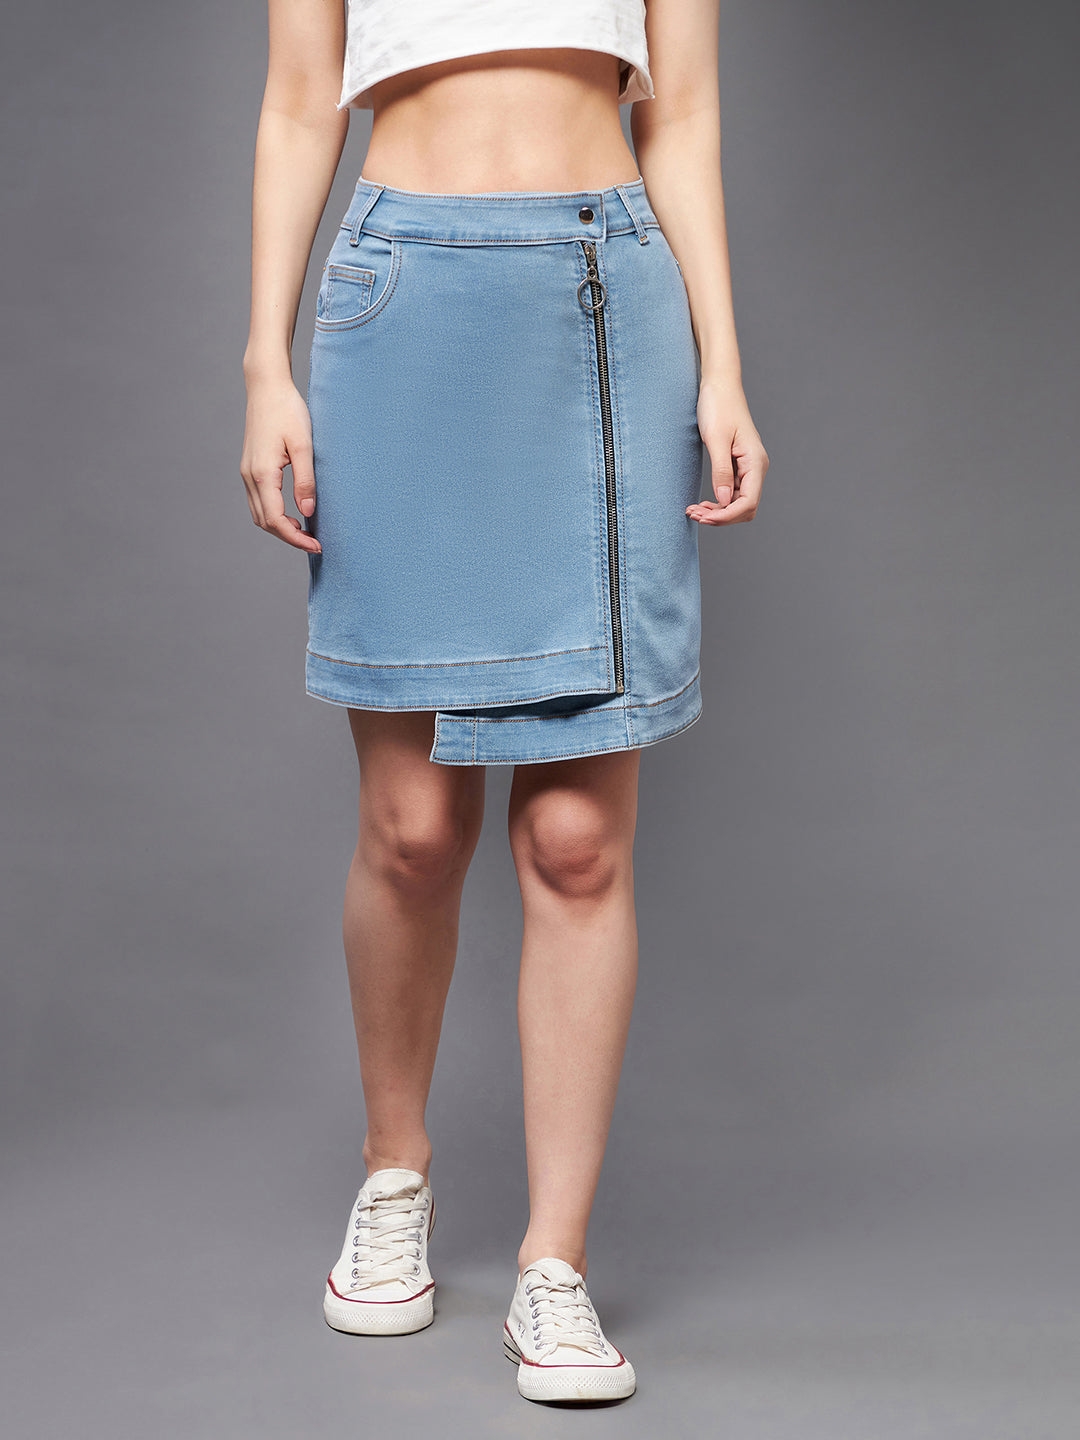 MISS CHASE | Light Blue Regular High rise Clean look Above Knee Stretchable Denim Skirt